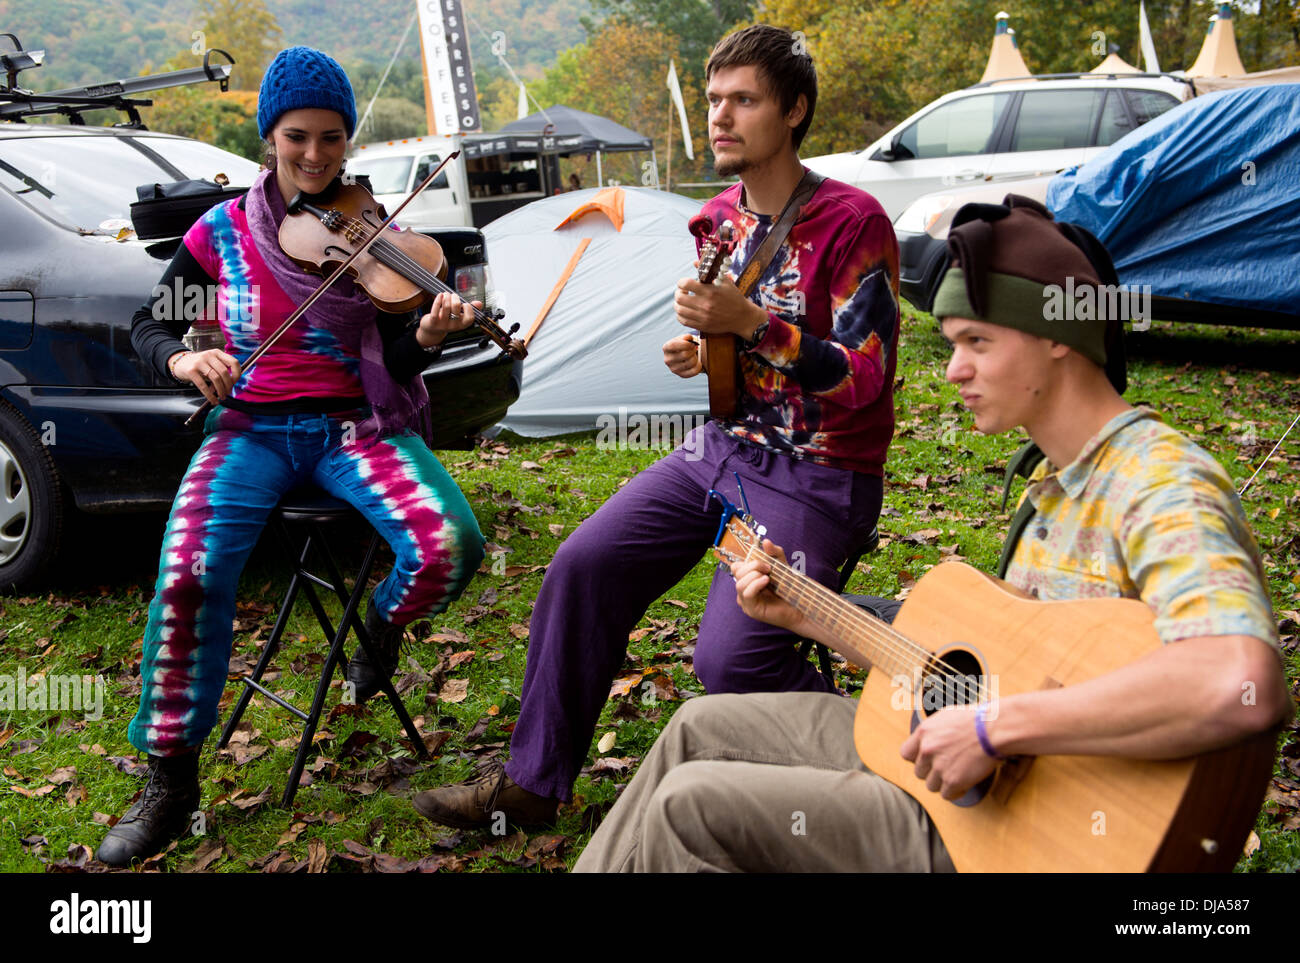 Musicians playing stringed instruments at the Leaf Festival (Lake Eden Arts Festival) at Black Mountain North Carolina. Stock Photo